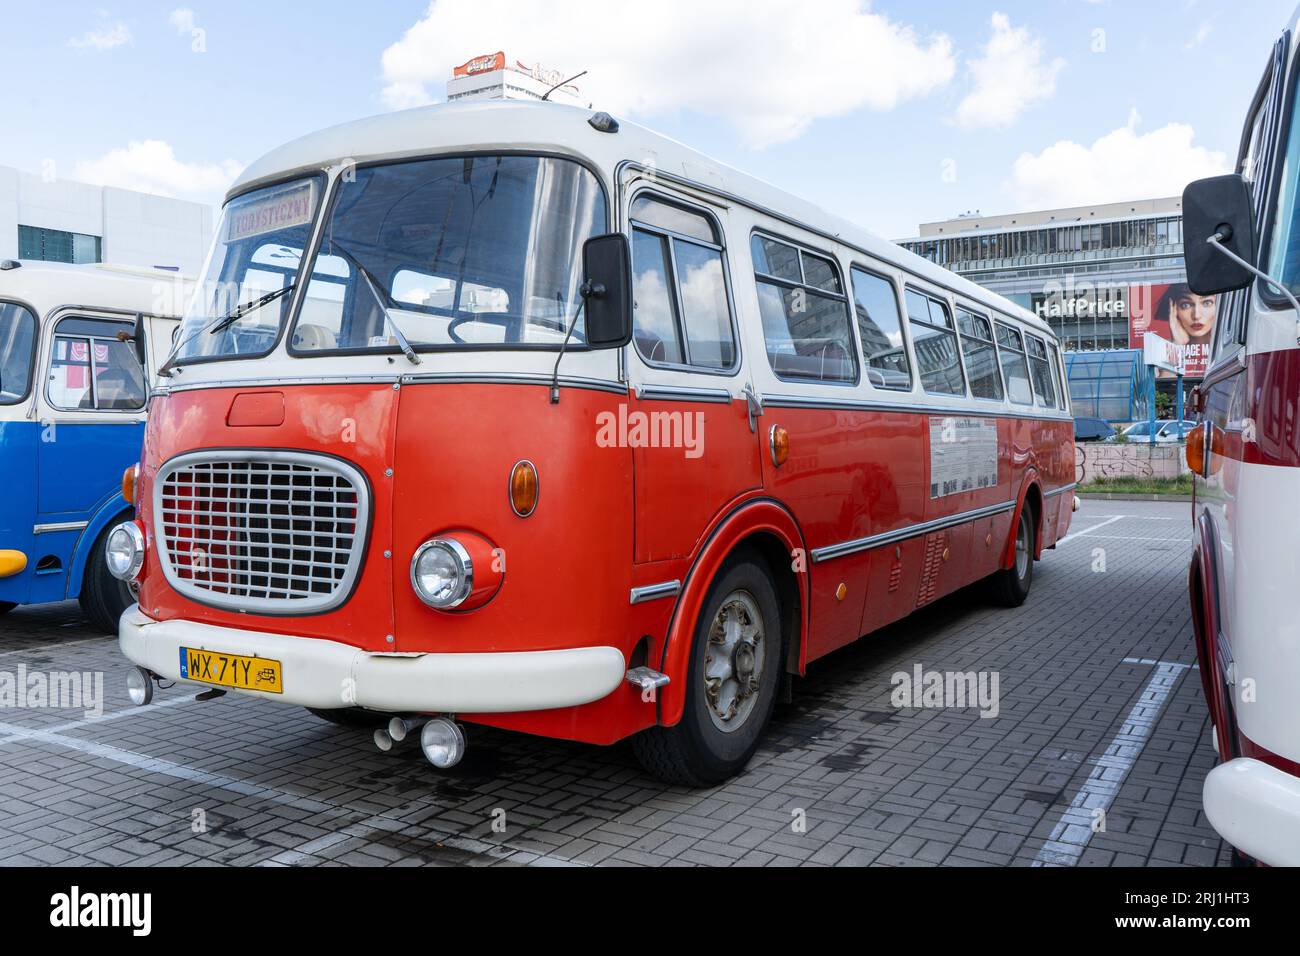 The old red and blue Skoda bus. Czechoslovakian Skoda RTO 706 Karosa model. Tourist buses vintage model. The street of the old city is a tourist attraction. Poland, Warsaw - July 27, 2023. Stock Photo